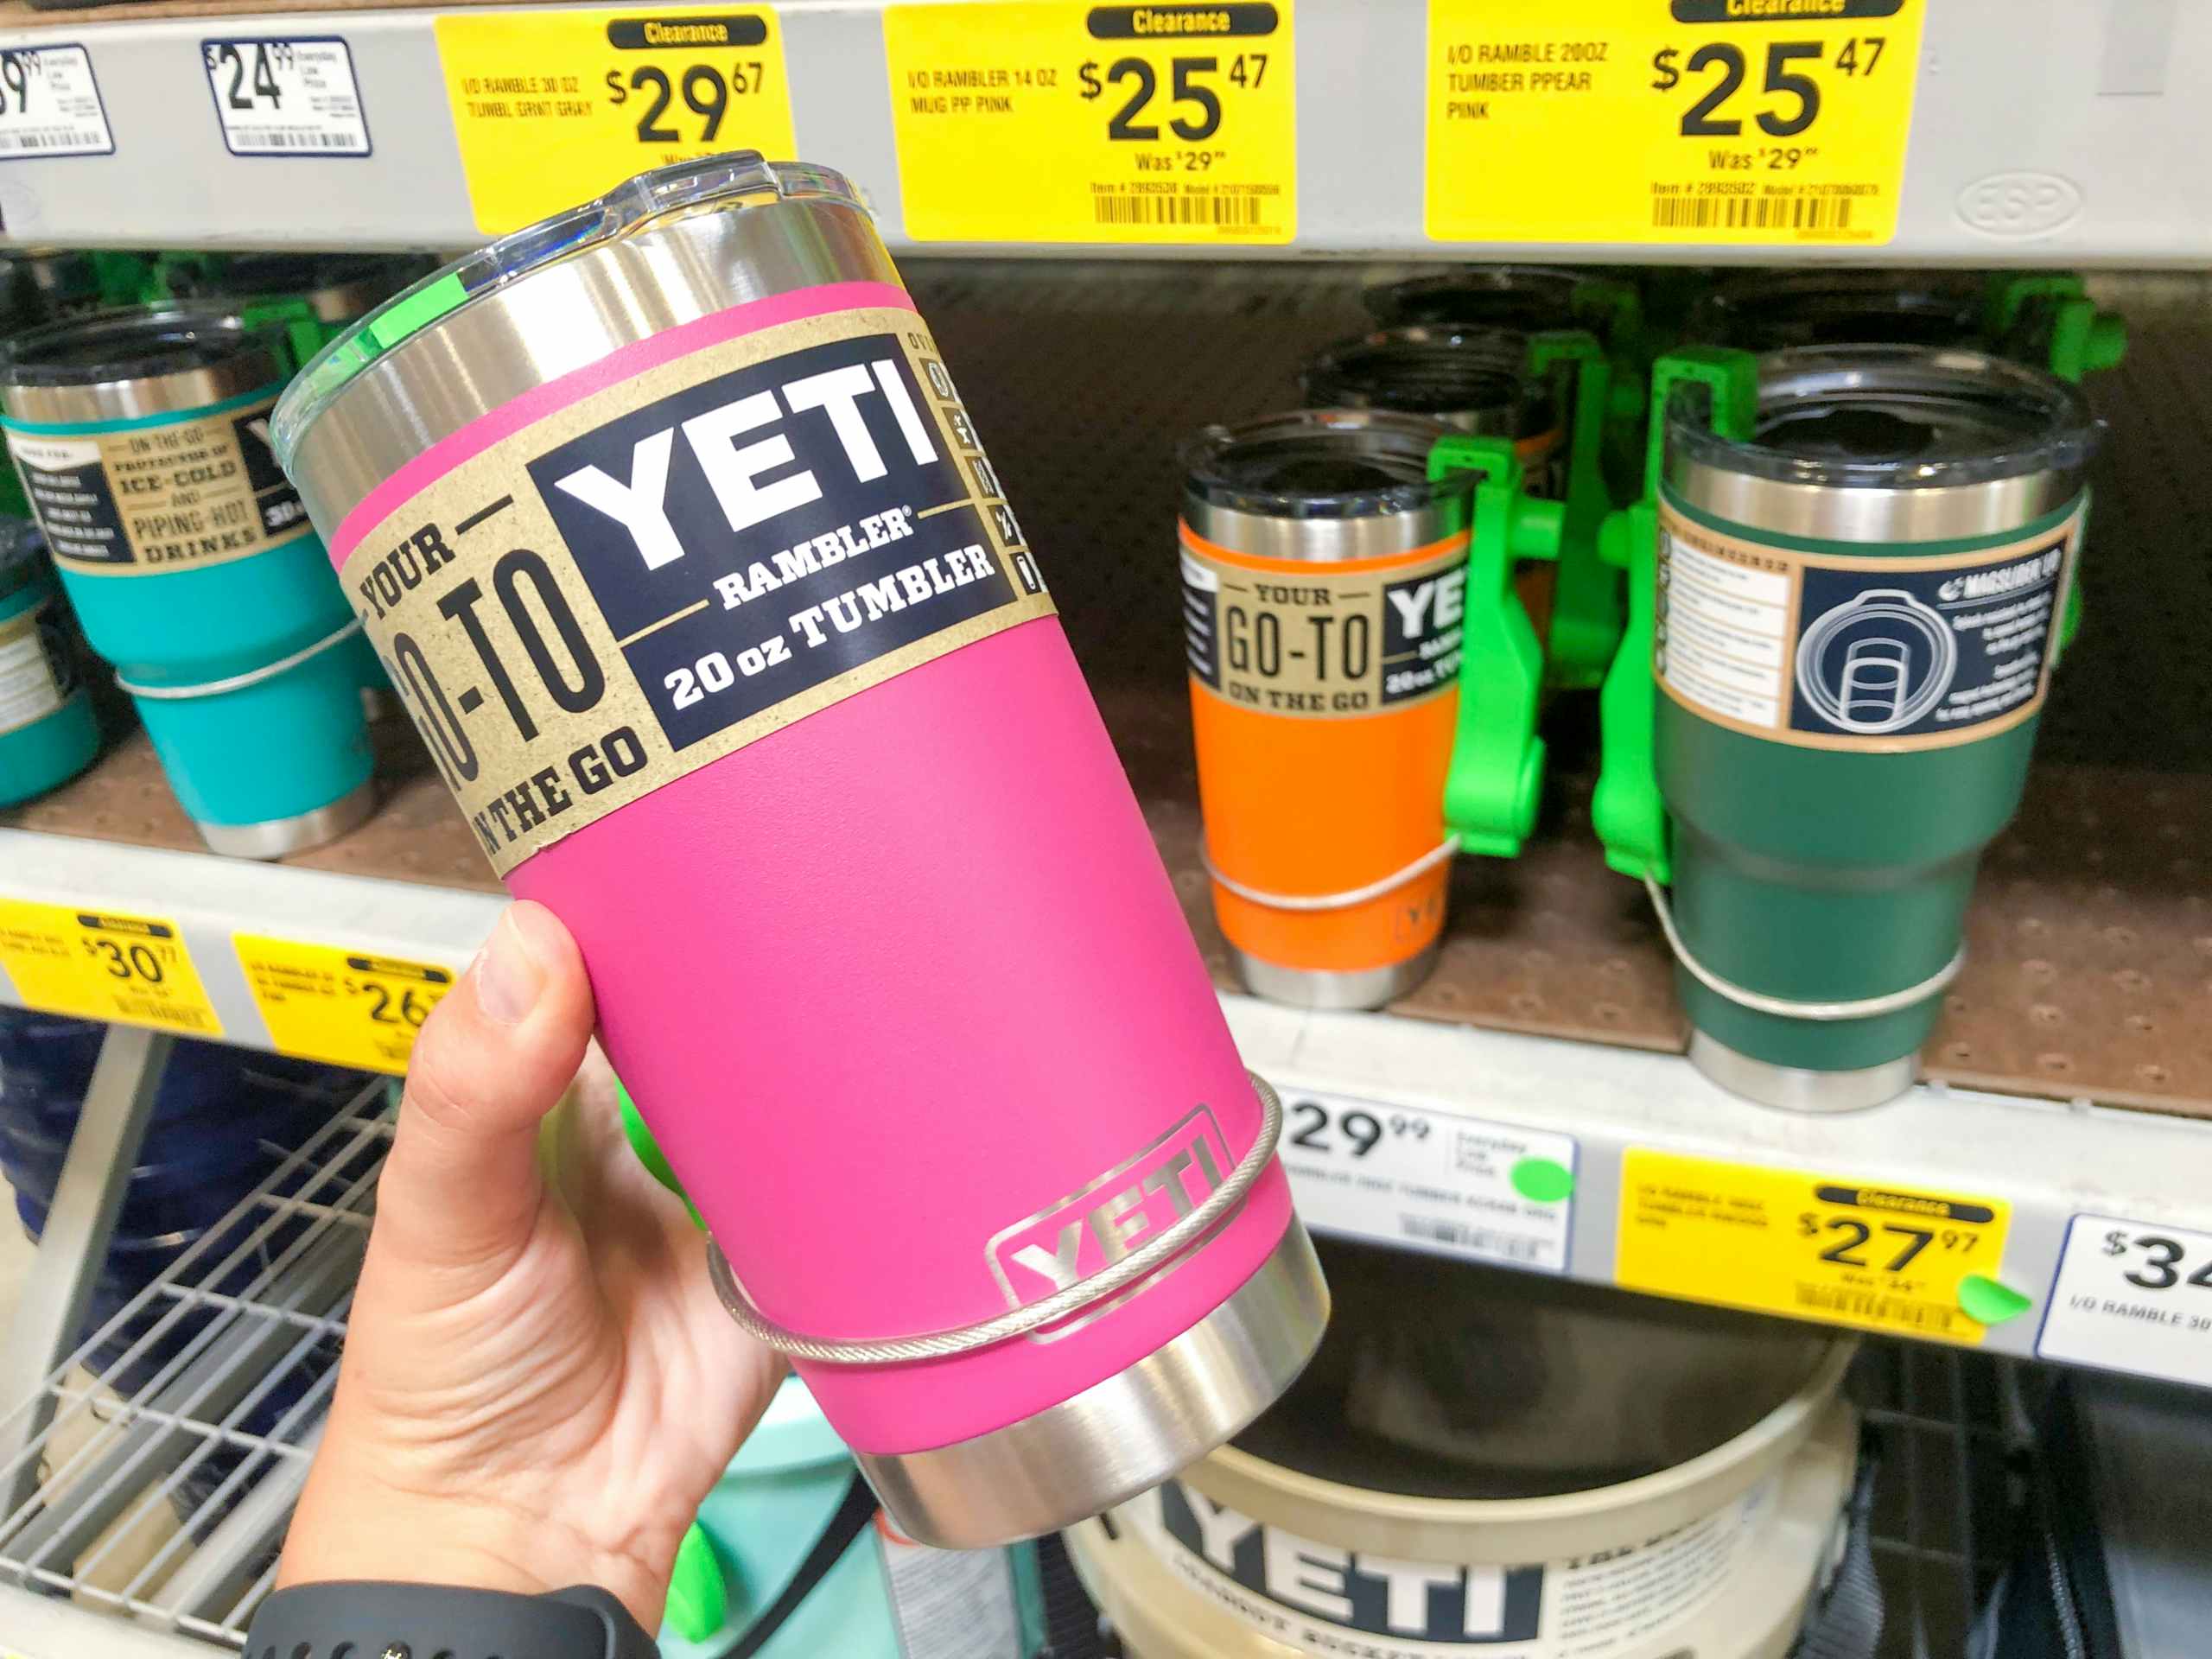 hand holding YETI mug in front of clearance display at Lowe's